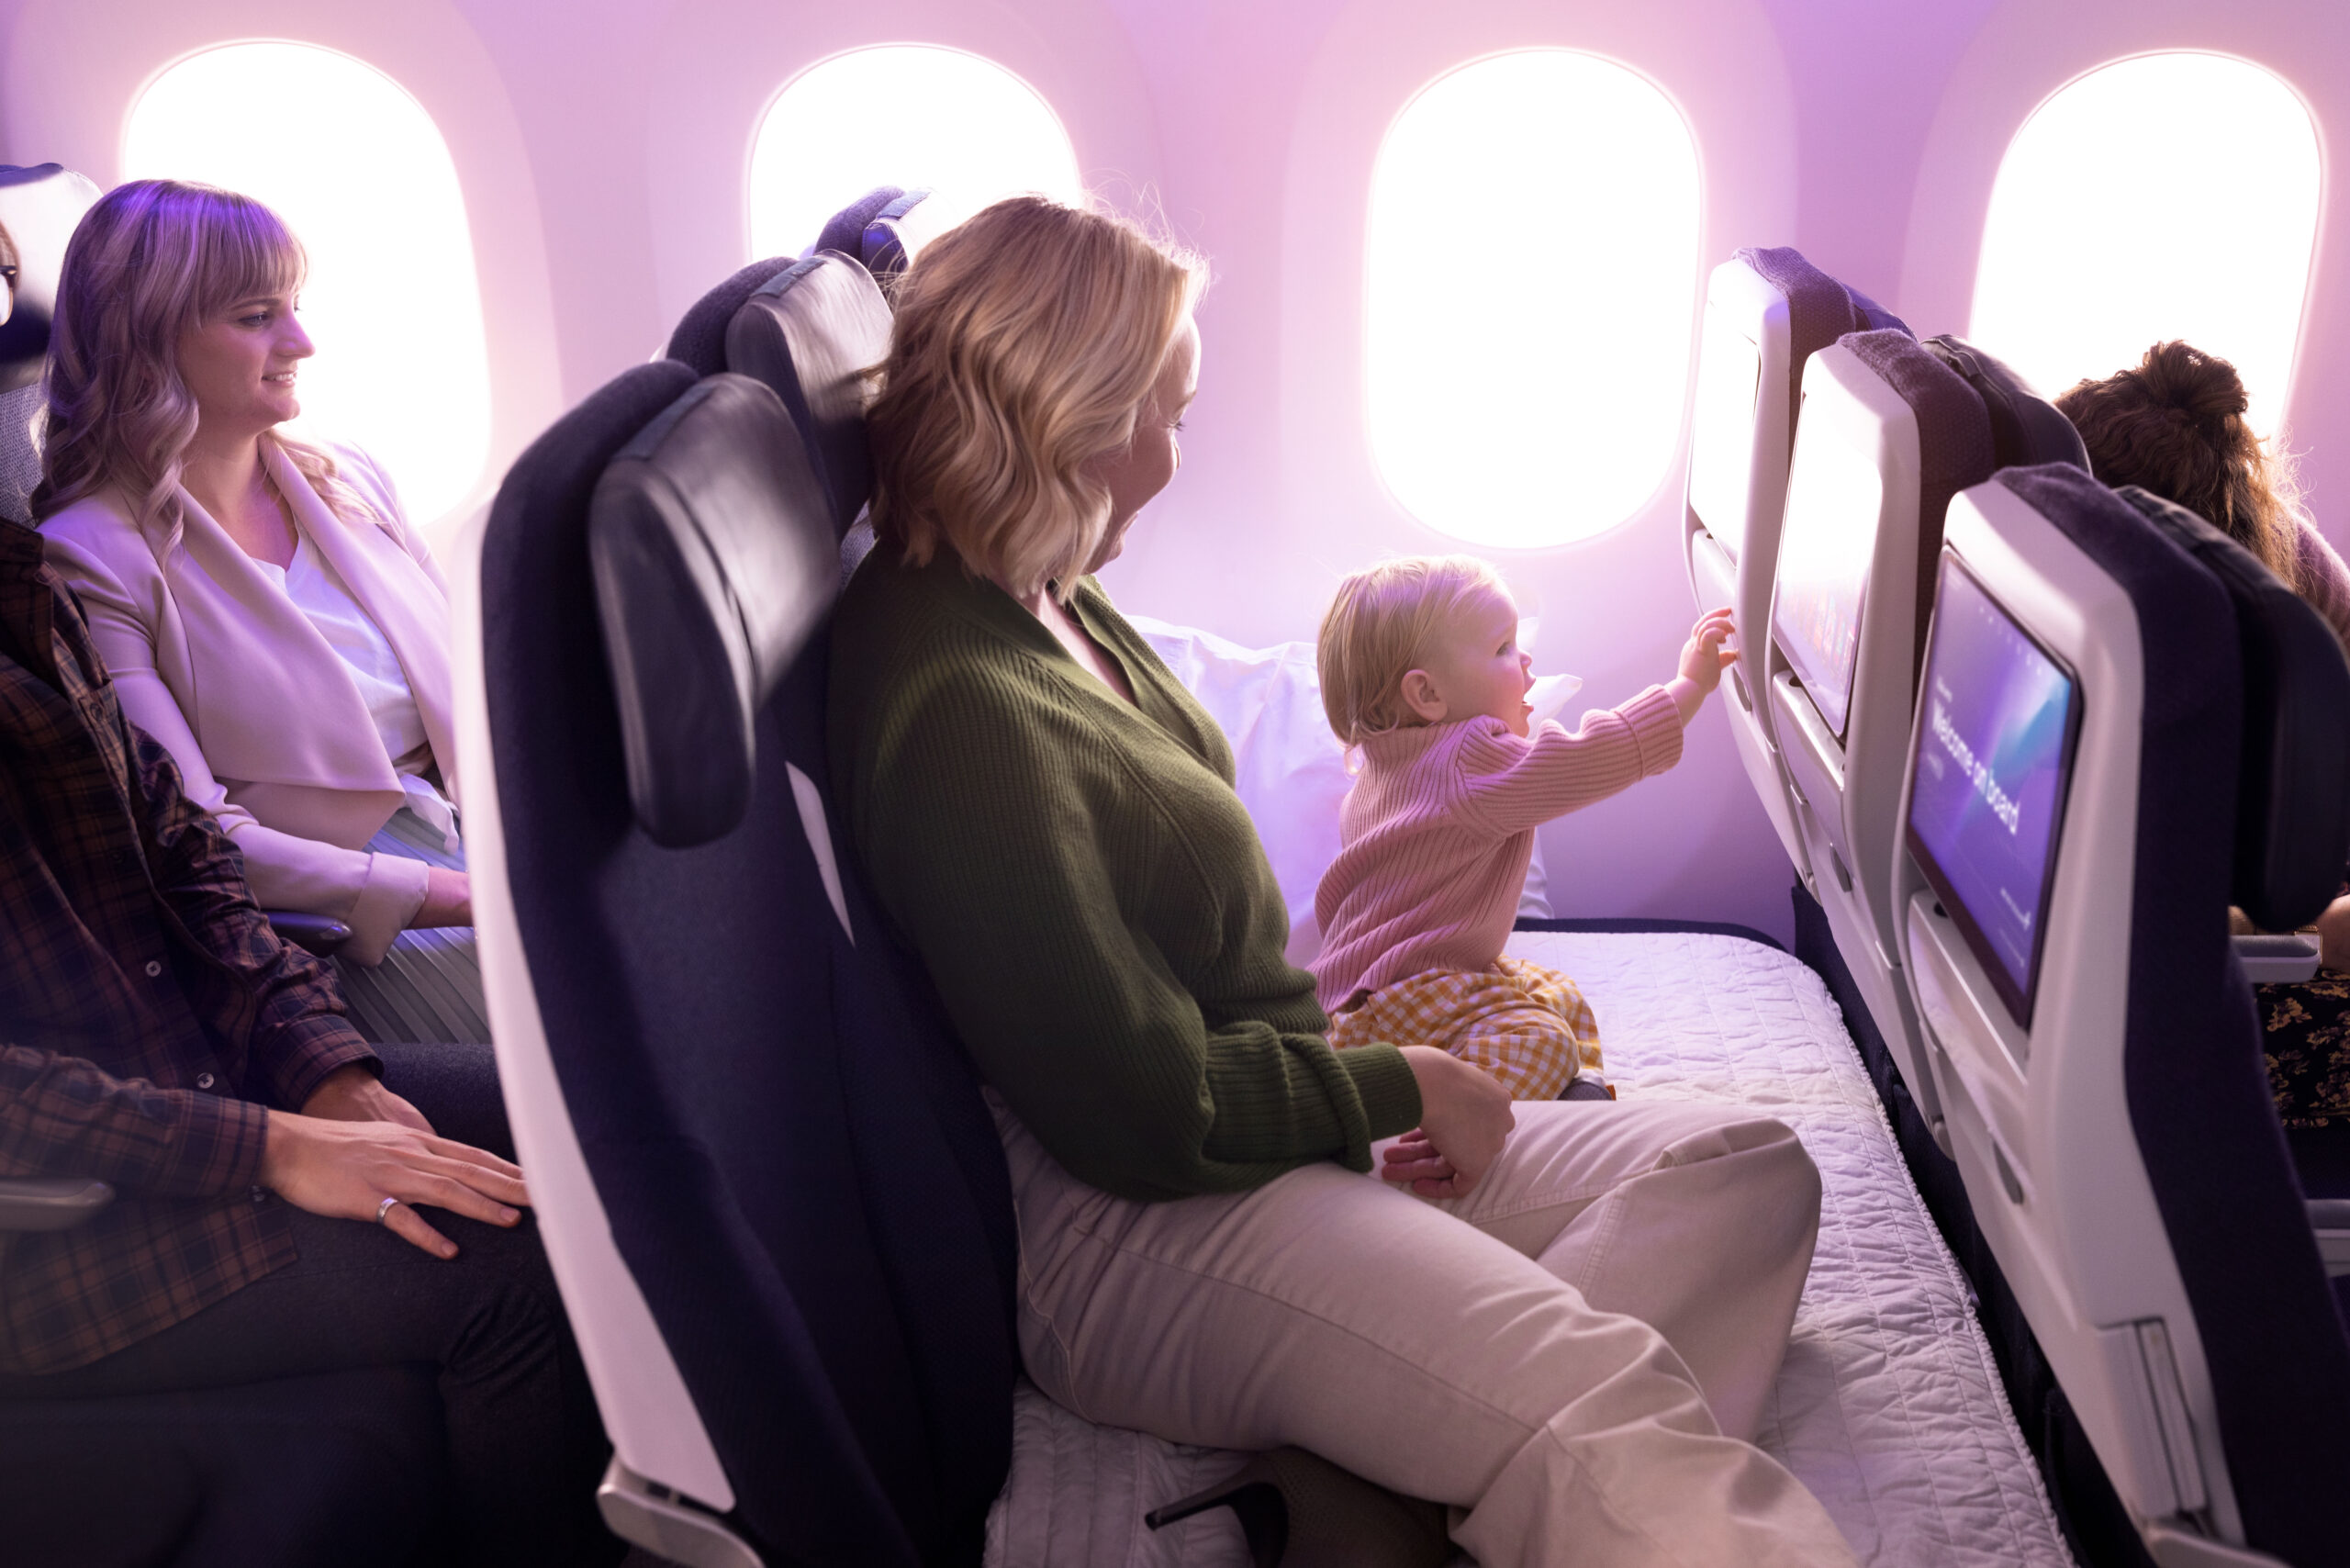 Skycouch Seat (Photo Credit: Air New Zealand)